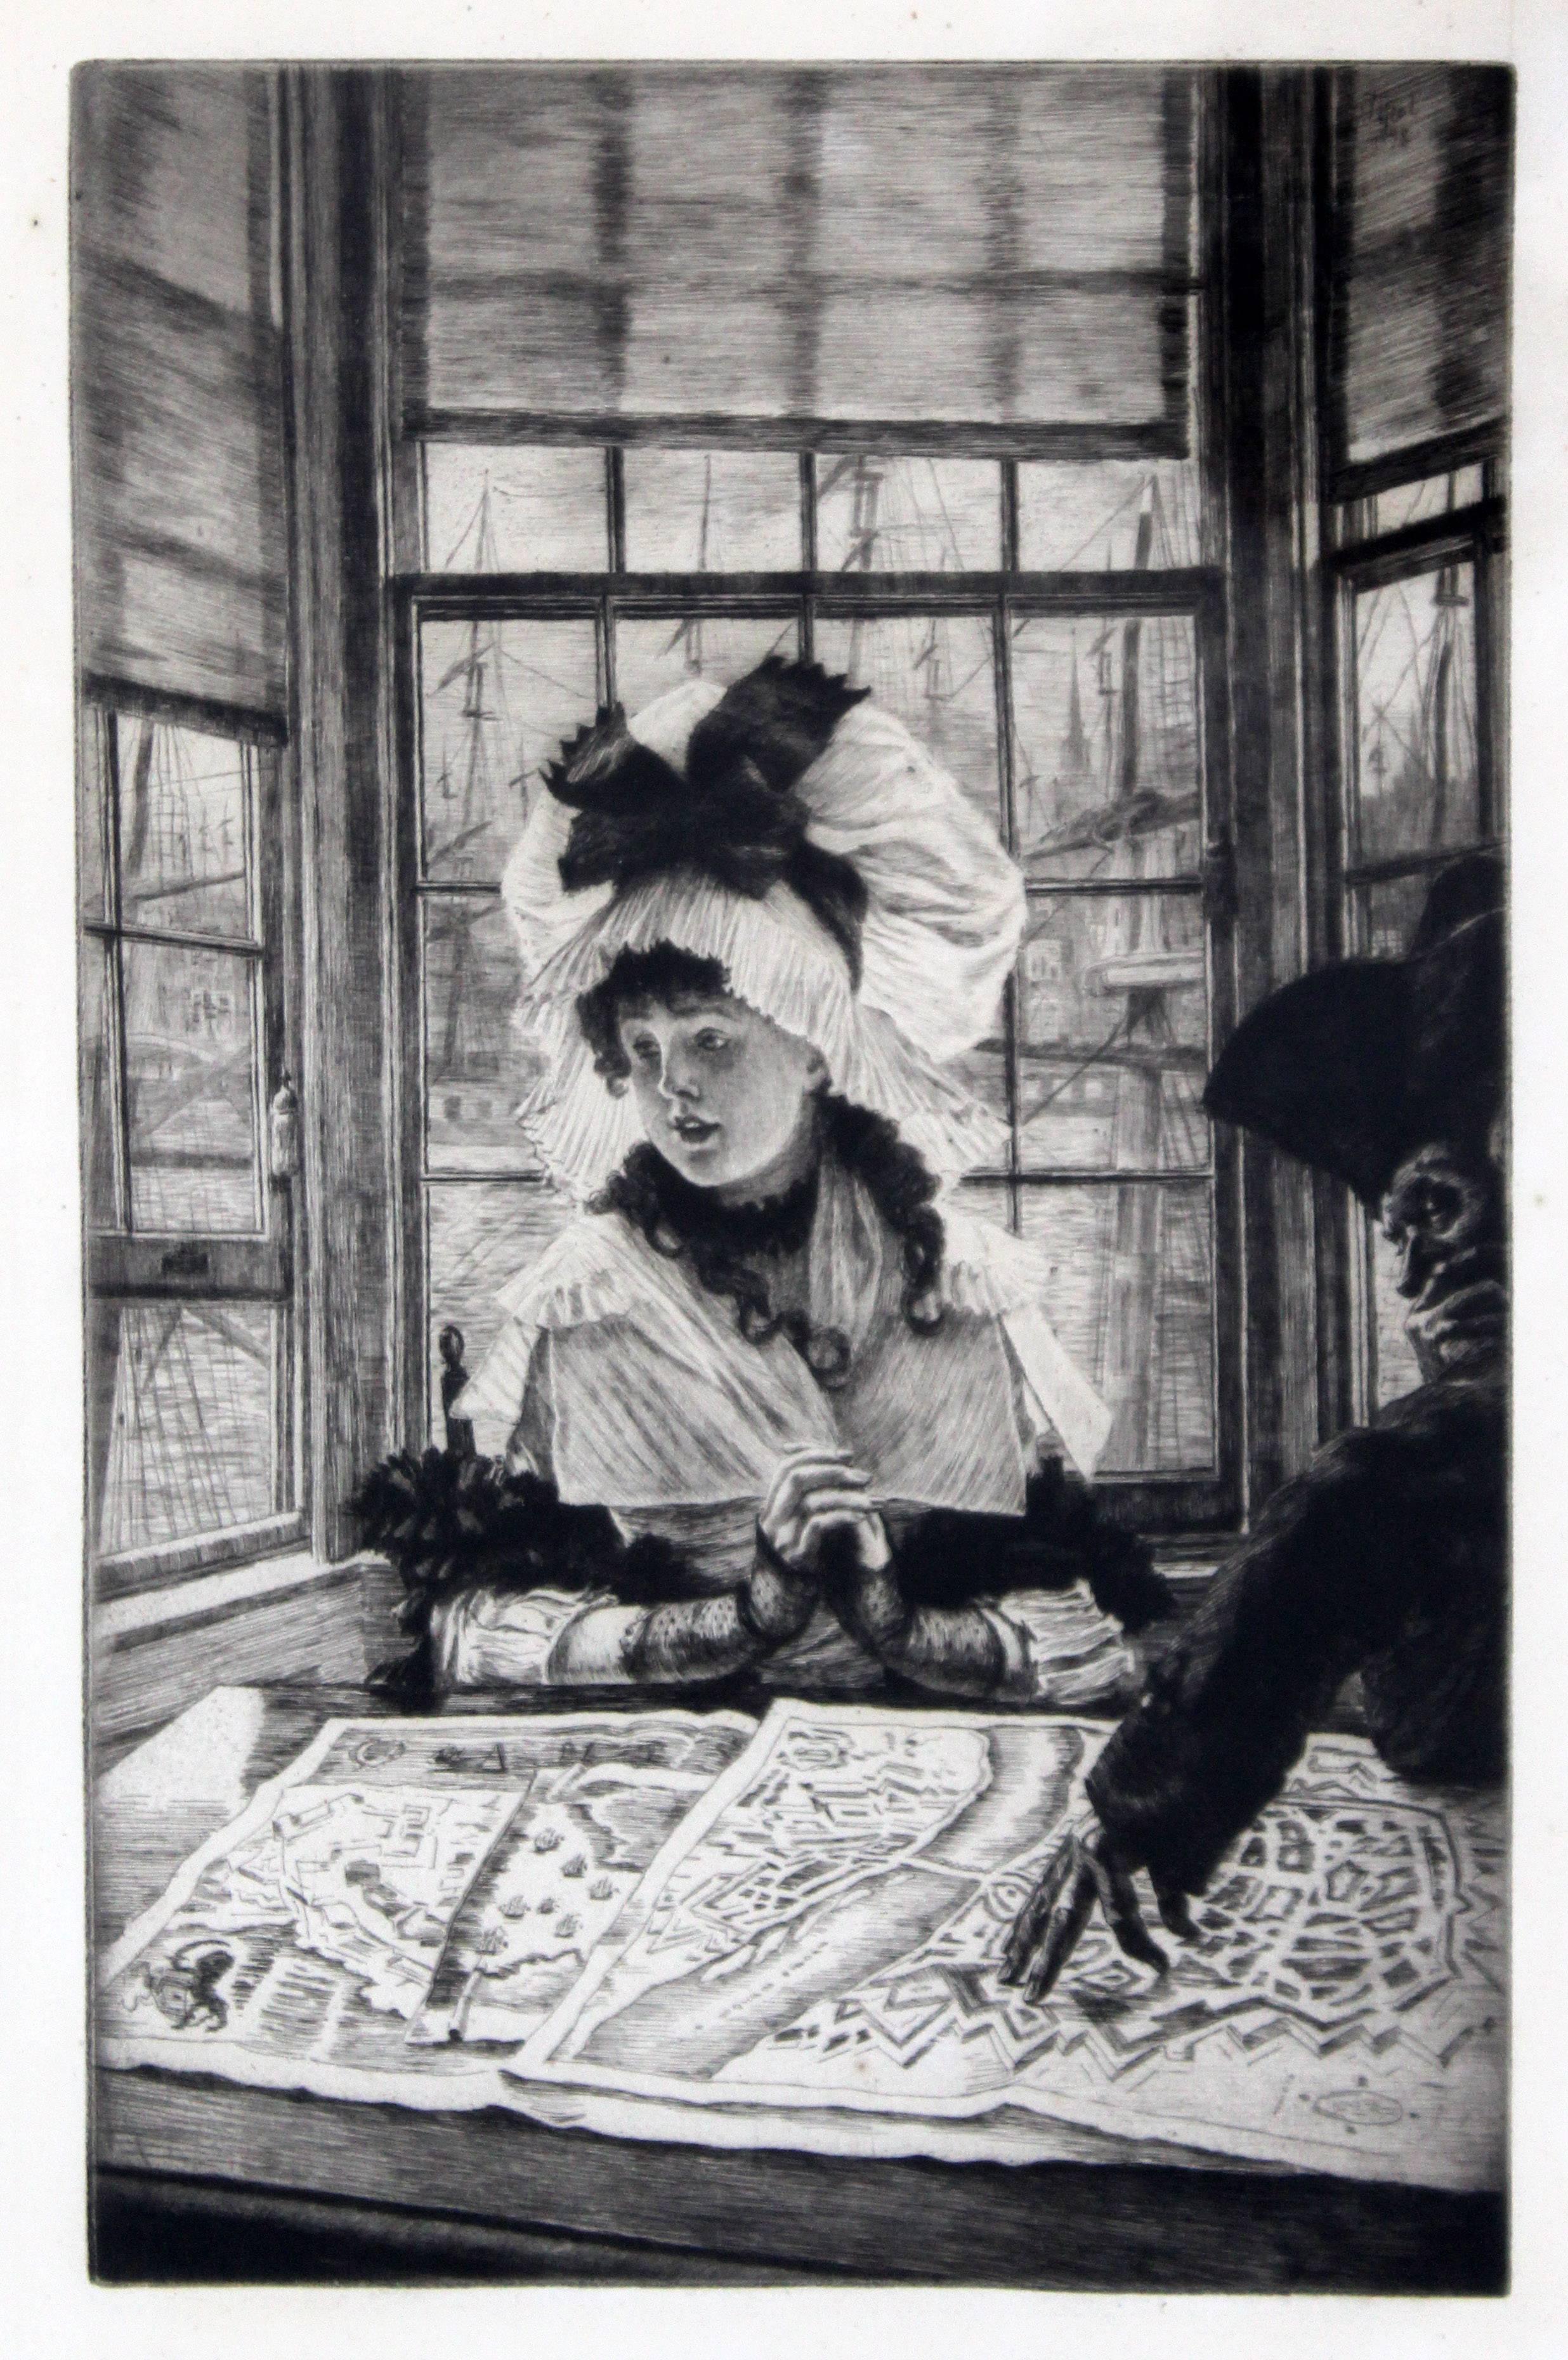 James Jacques Joseph Tissot (1836-1902) Histoire ennuyeuse etching, 1878, on wove paper, from the edition of about 100, with margins, light-staining color of paper, otherwise in good condition, framed. The frame measures in at 17